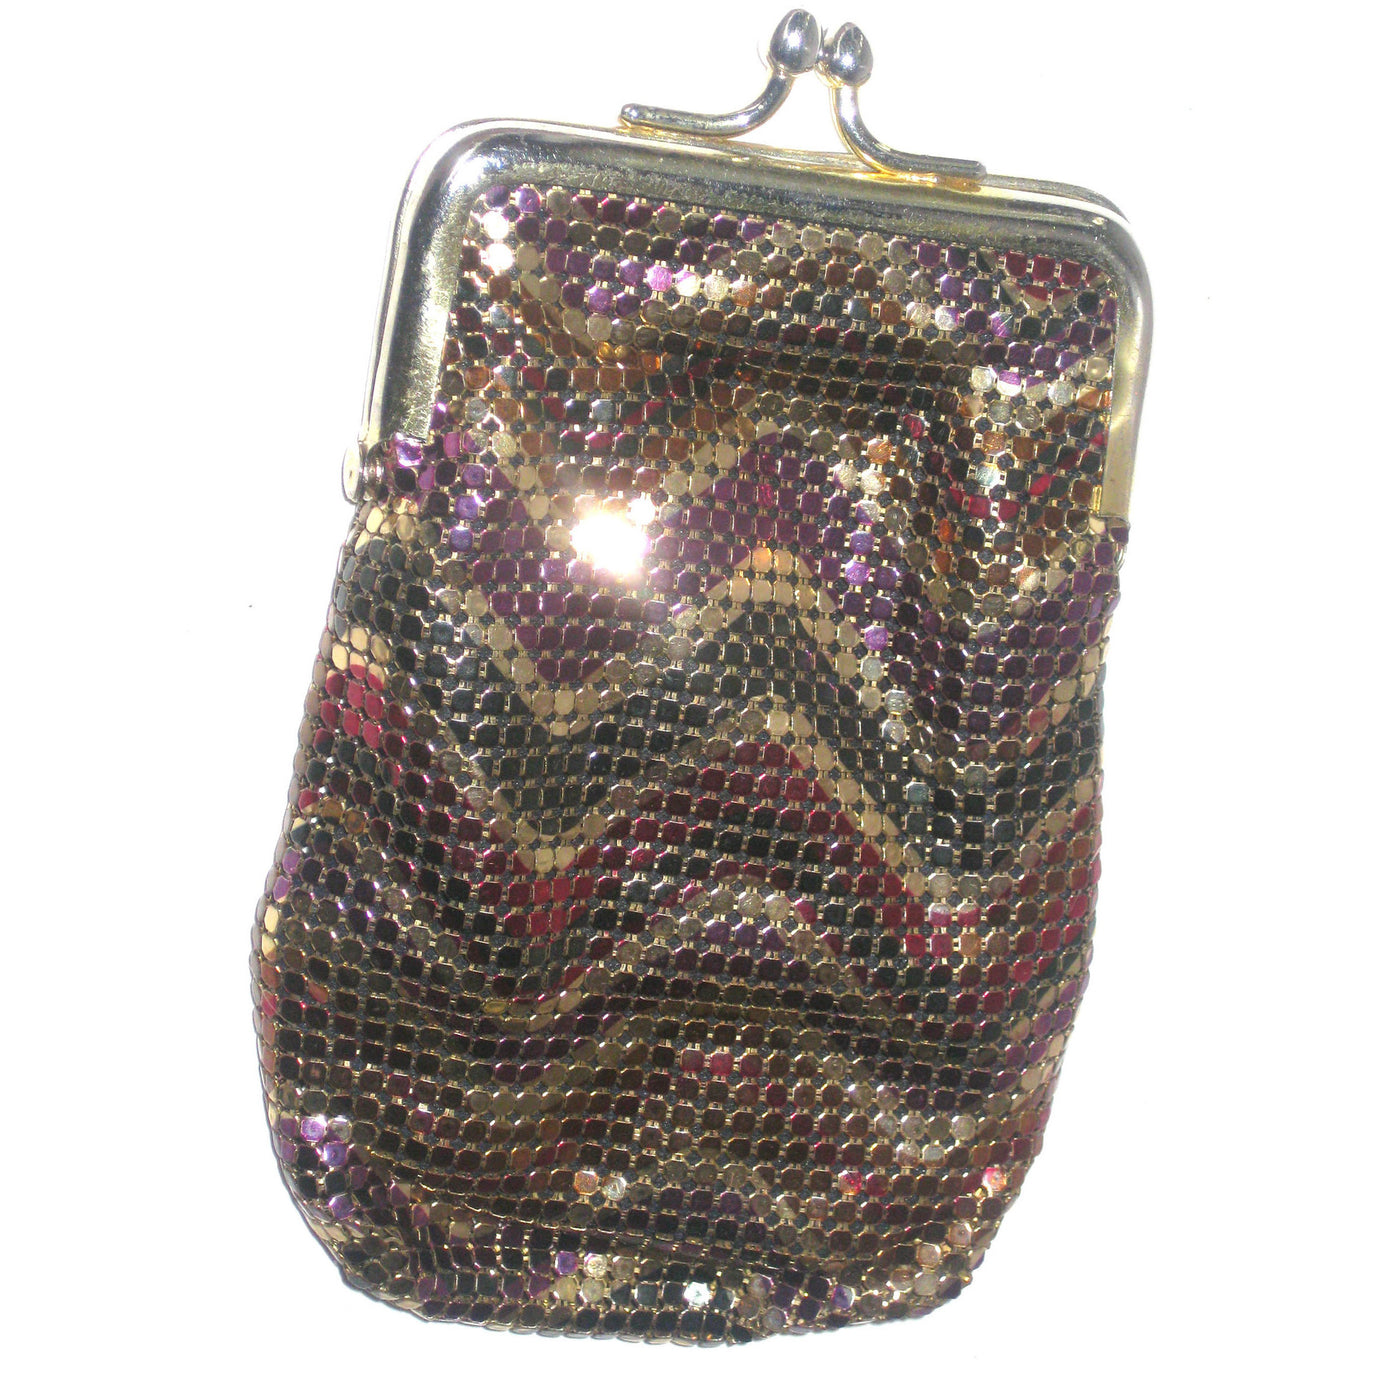 Vintage Rainbow Mesh Coin Purse By Whiting & Davis